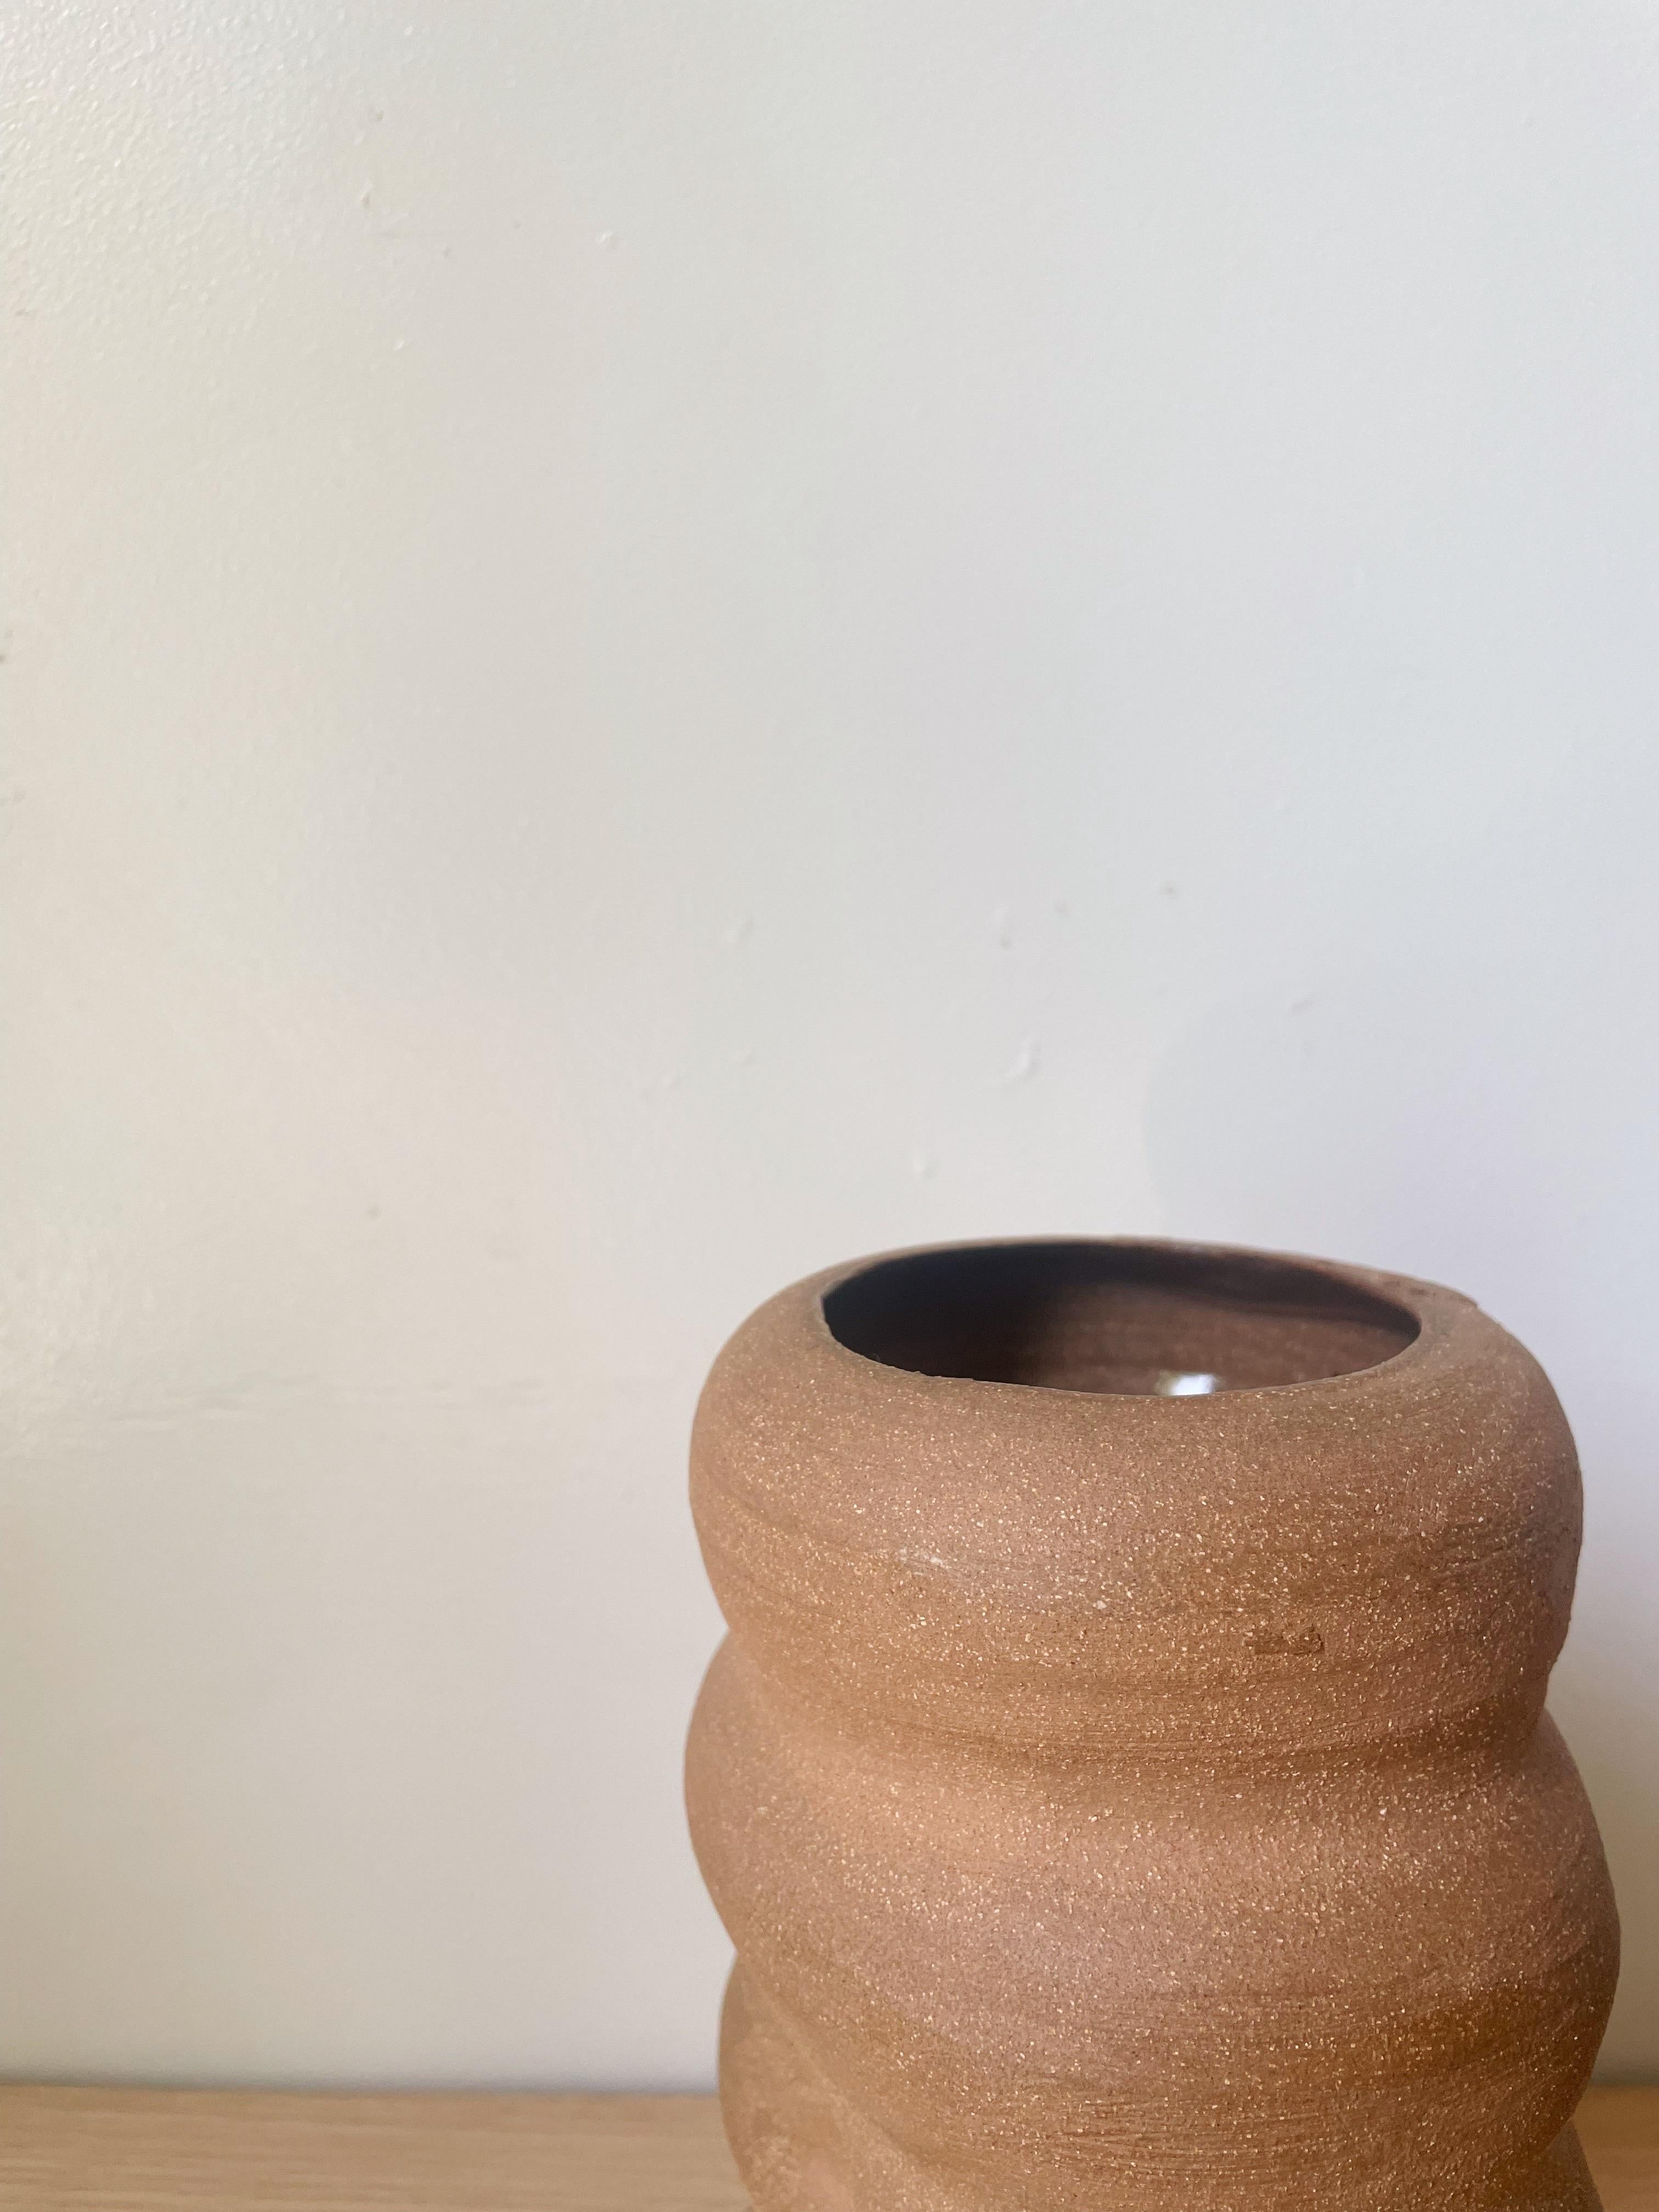 A raw hand thrown vessel. The vision with this piece, was to keep it simple and natural in its form and materiality. Stacking subtle lines of the exterior, paired with the indents on a few sides, creates an interesting overall look and feel. Sitting